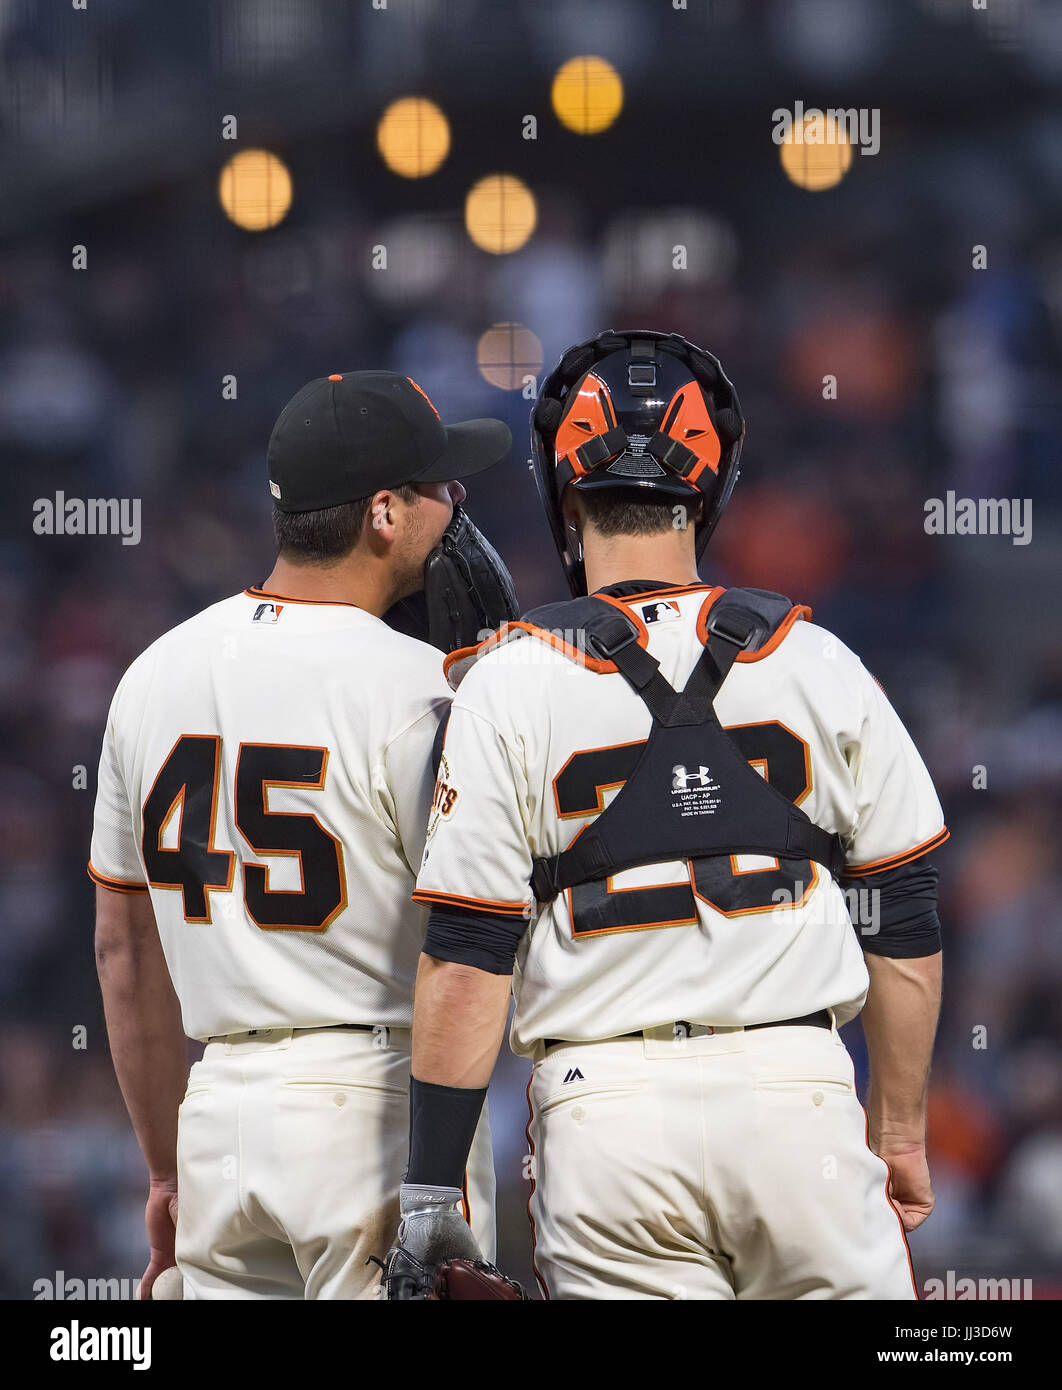 San Francisco, California, USA. 17th July, 2017. With a runner on second base, San Francisco Giants starting pitcher Matt Moore (45) and catcher Buster Posey (28) talk strategy on the mound, during a MLB baseball game between the Cleveland Indians and the San Francisco Giants at AT&T Park in San Francisco, California. Valerie Shoaps/CSM/Alamy Live News Stock Photo